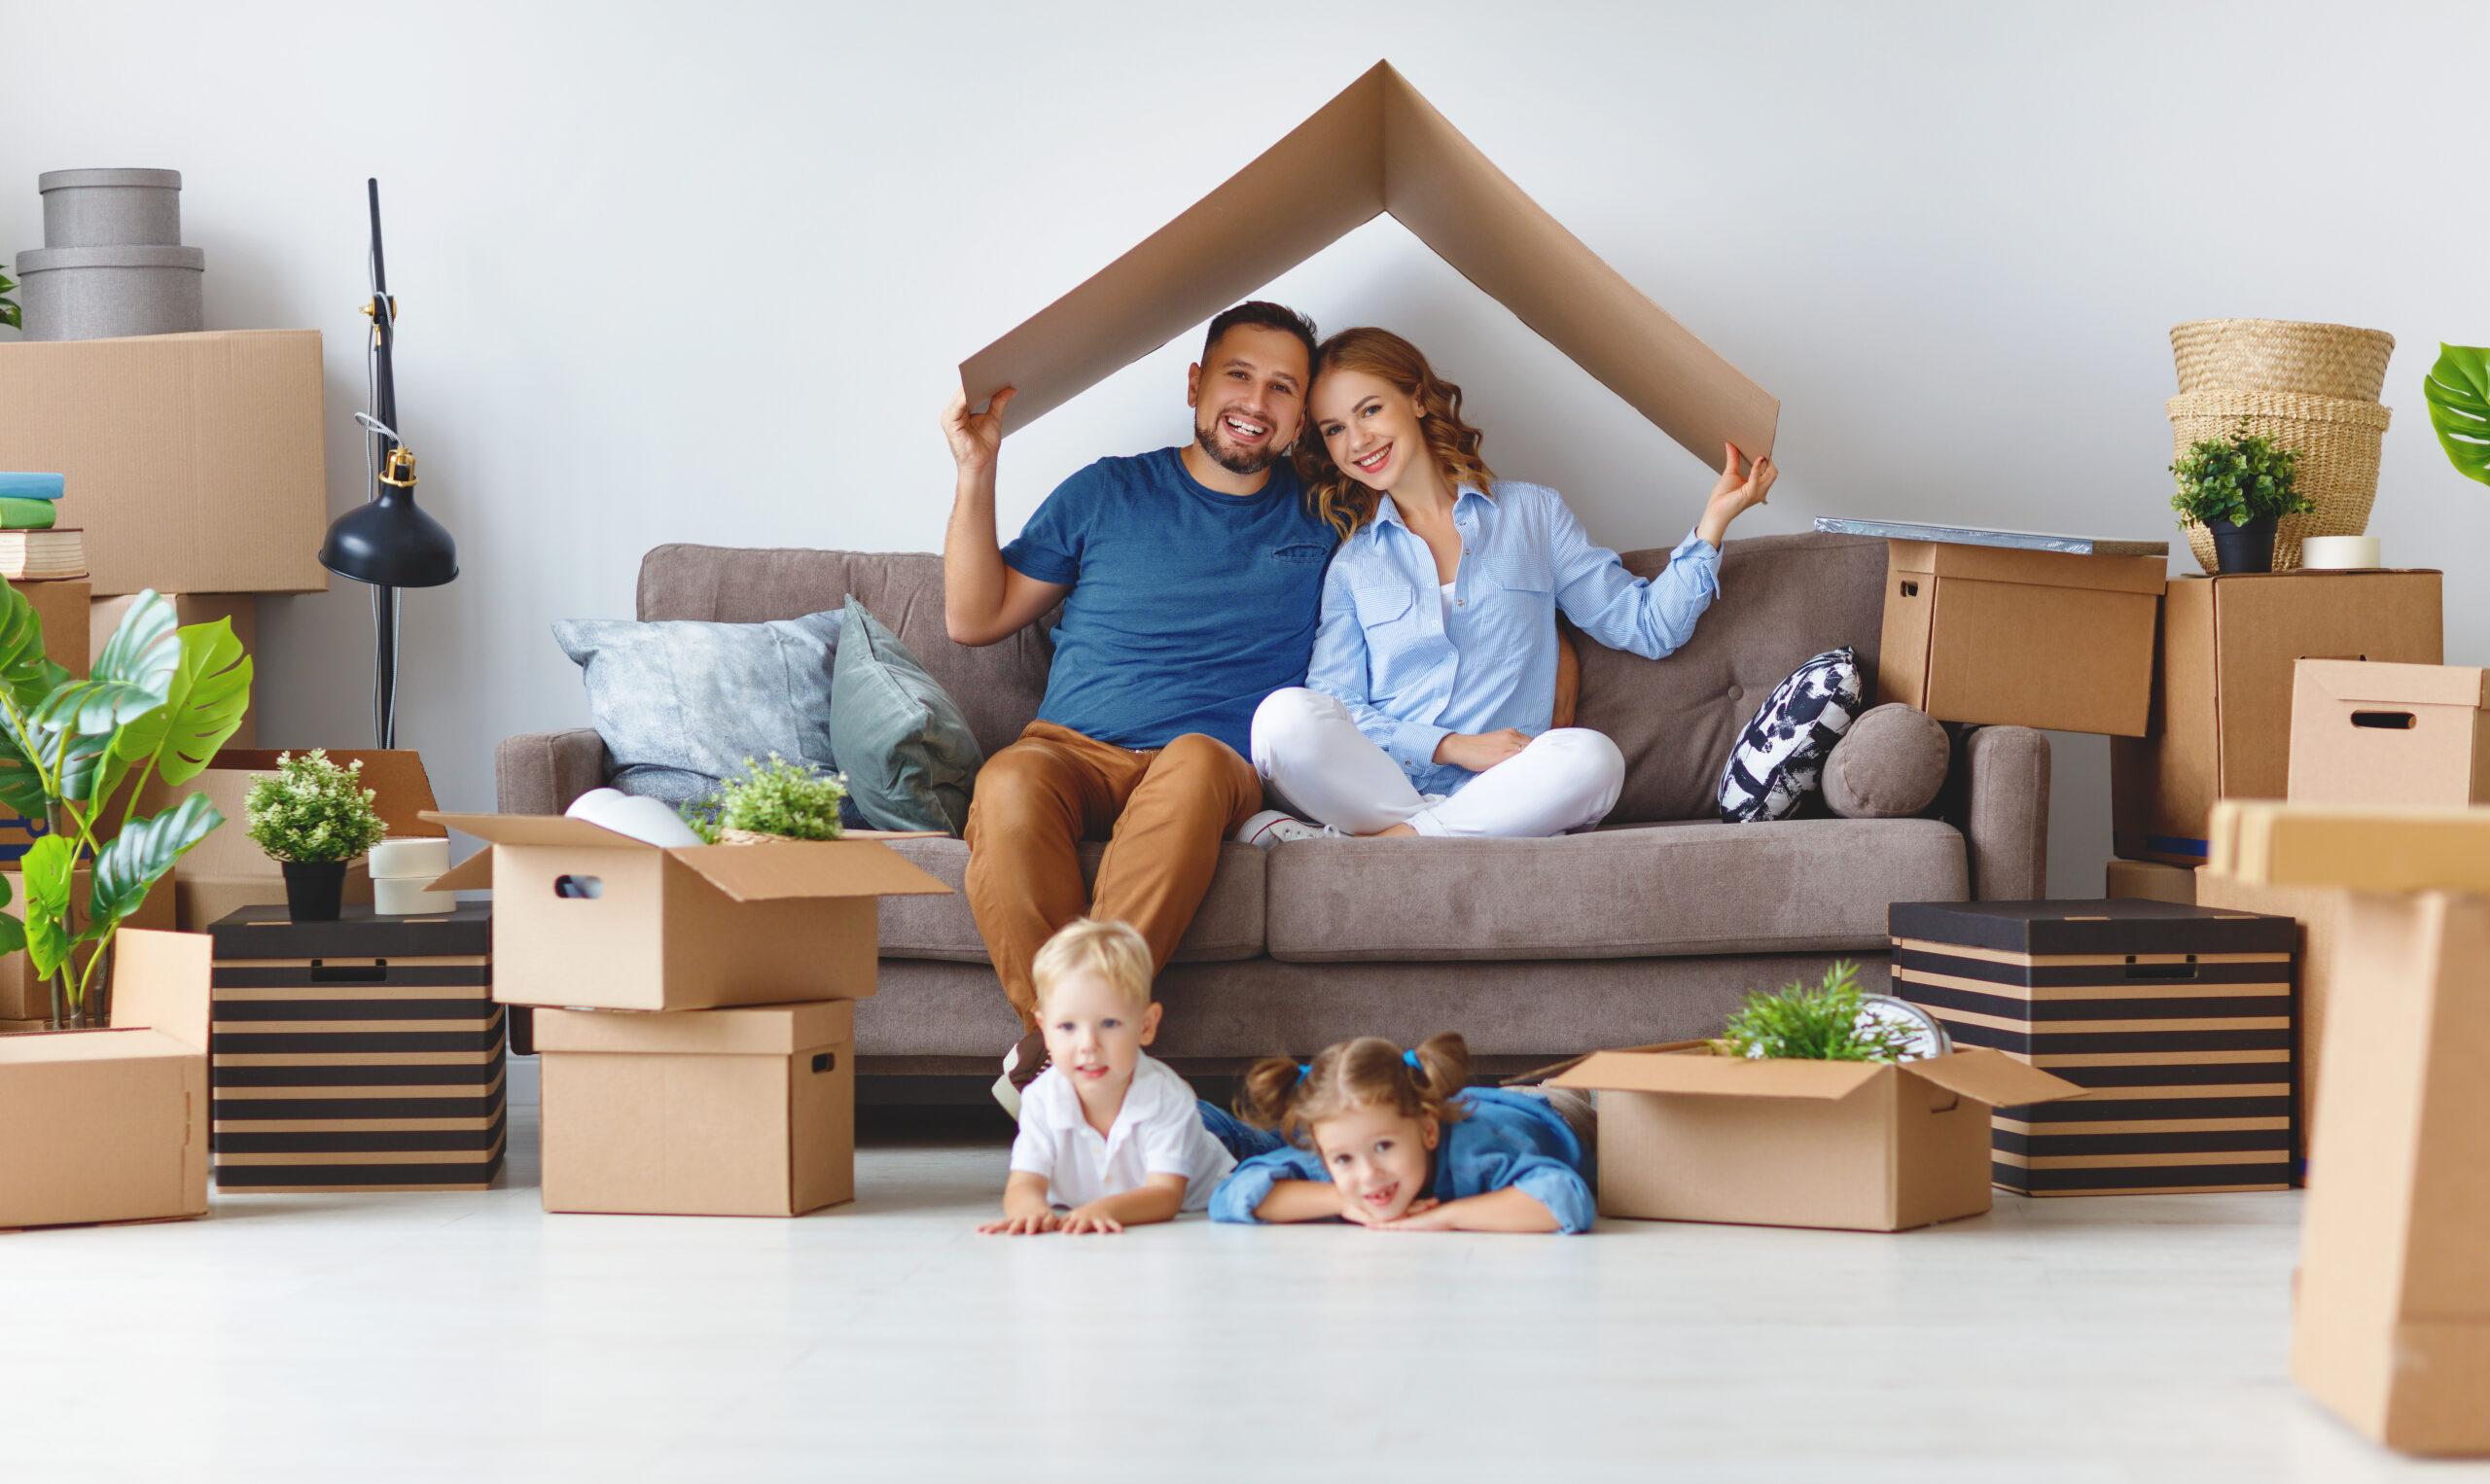 happy family mother father and children move to a new apartment with the help of reputable mortgage company